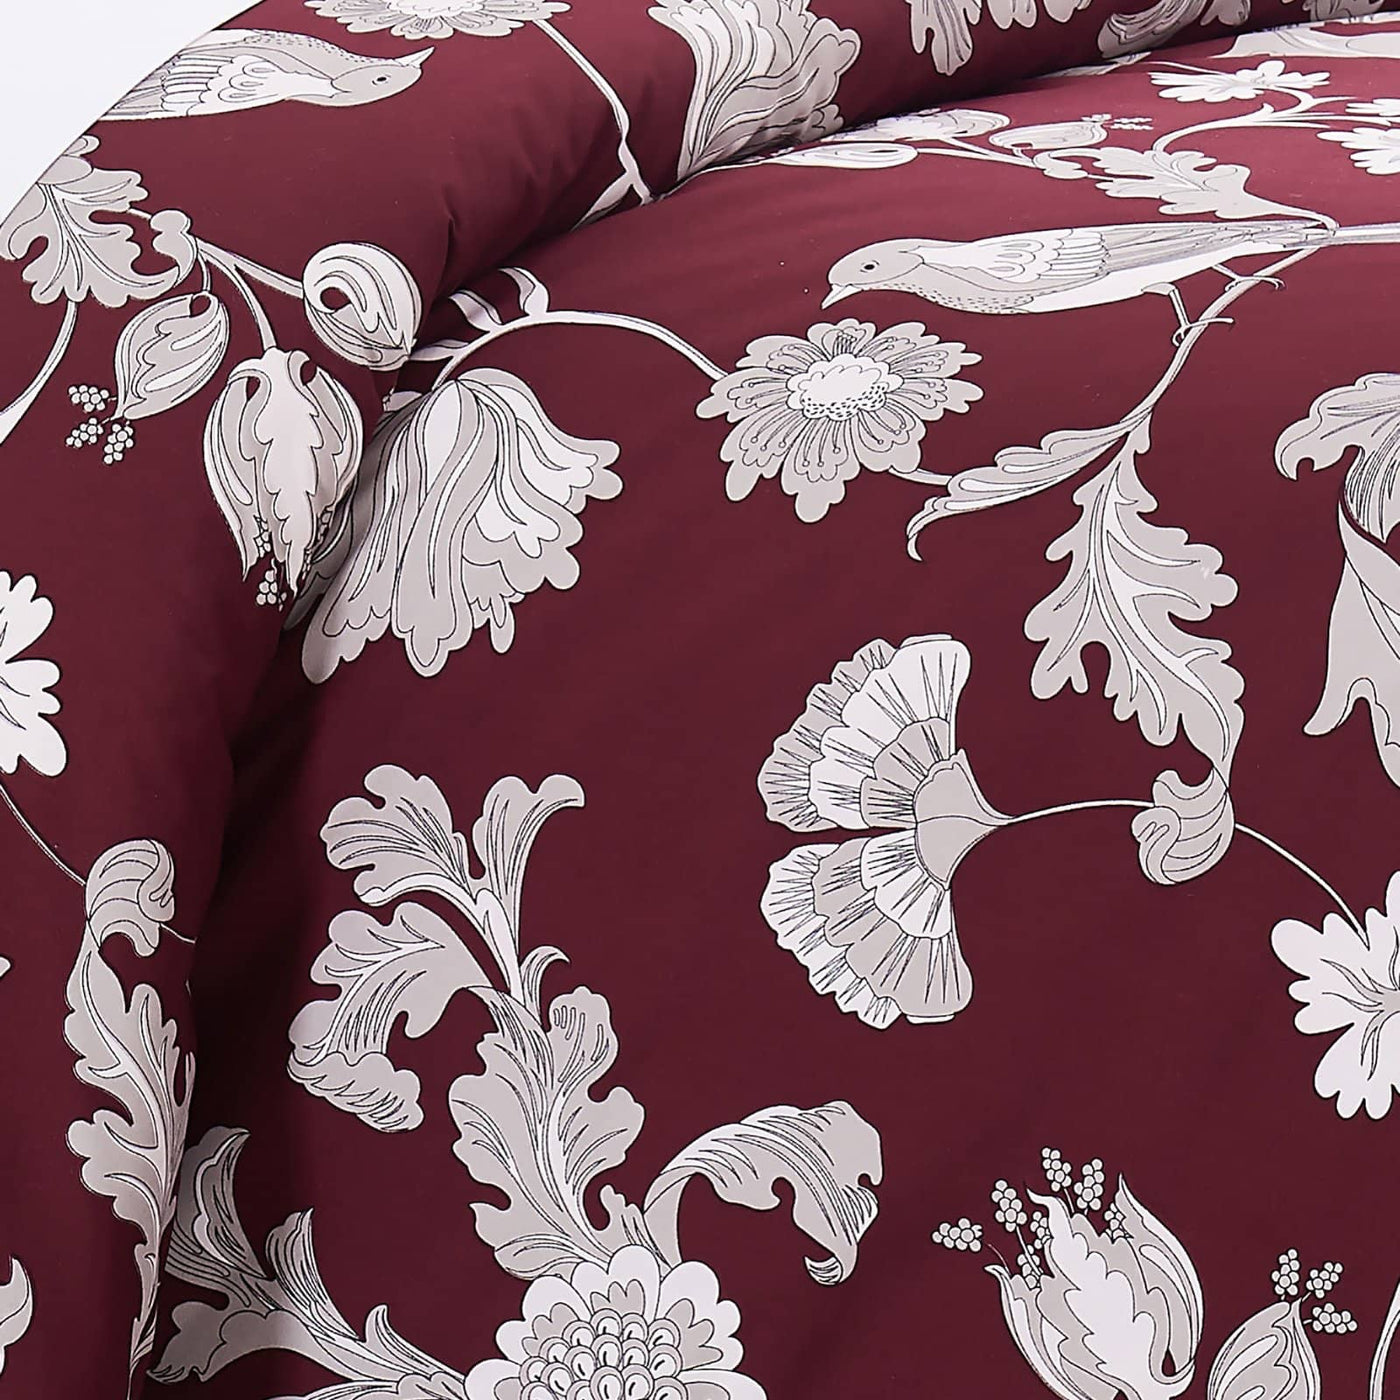 Early Spring Duvet Cover in Red#color_early-spring-red